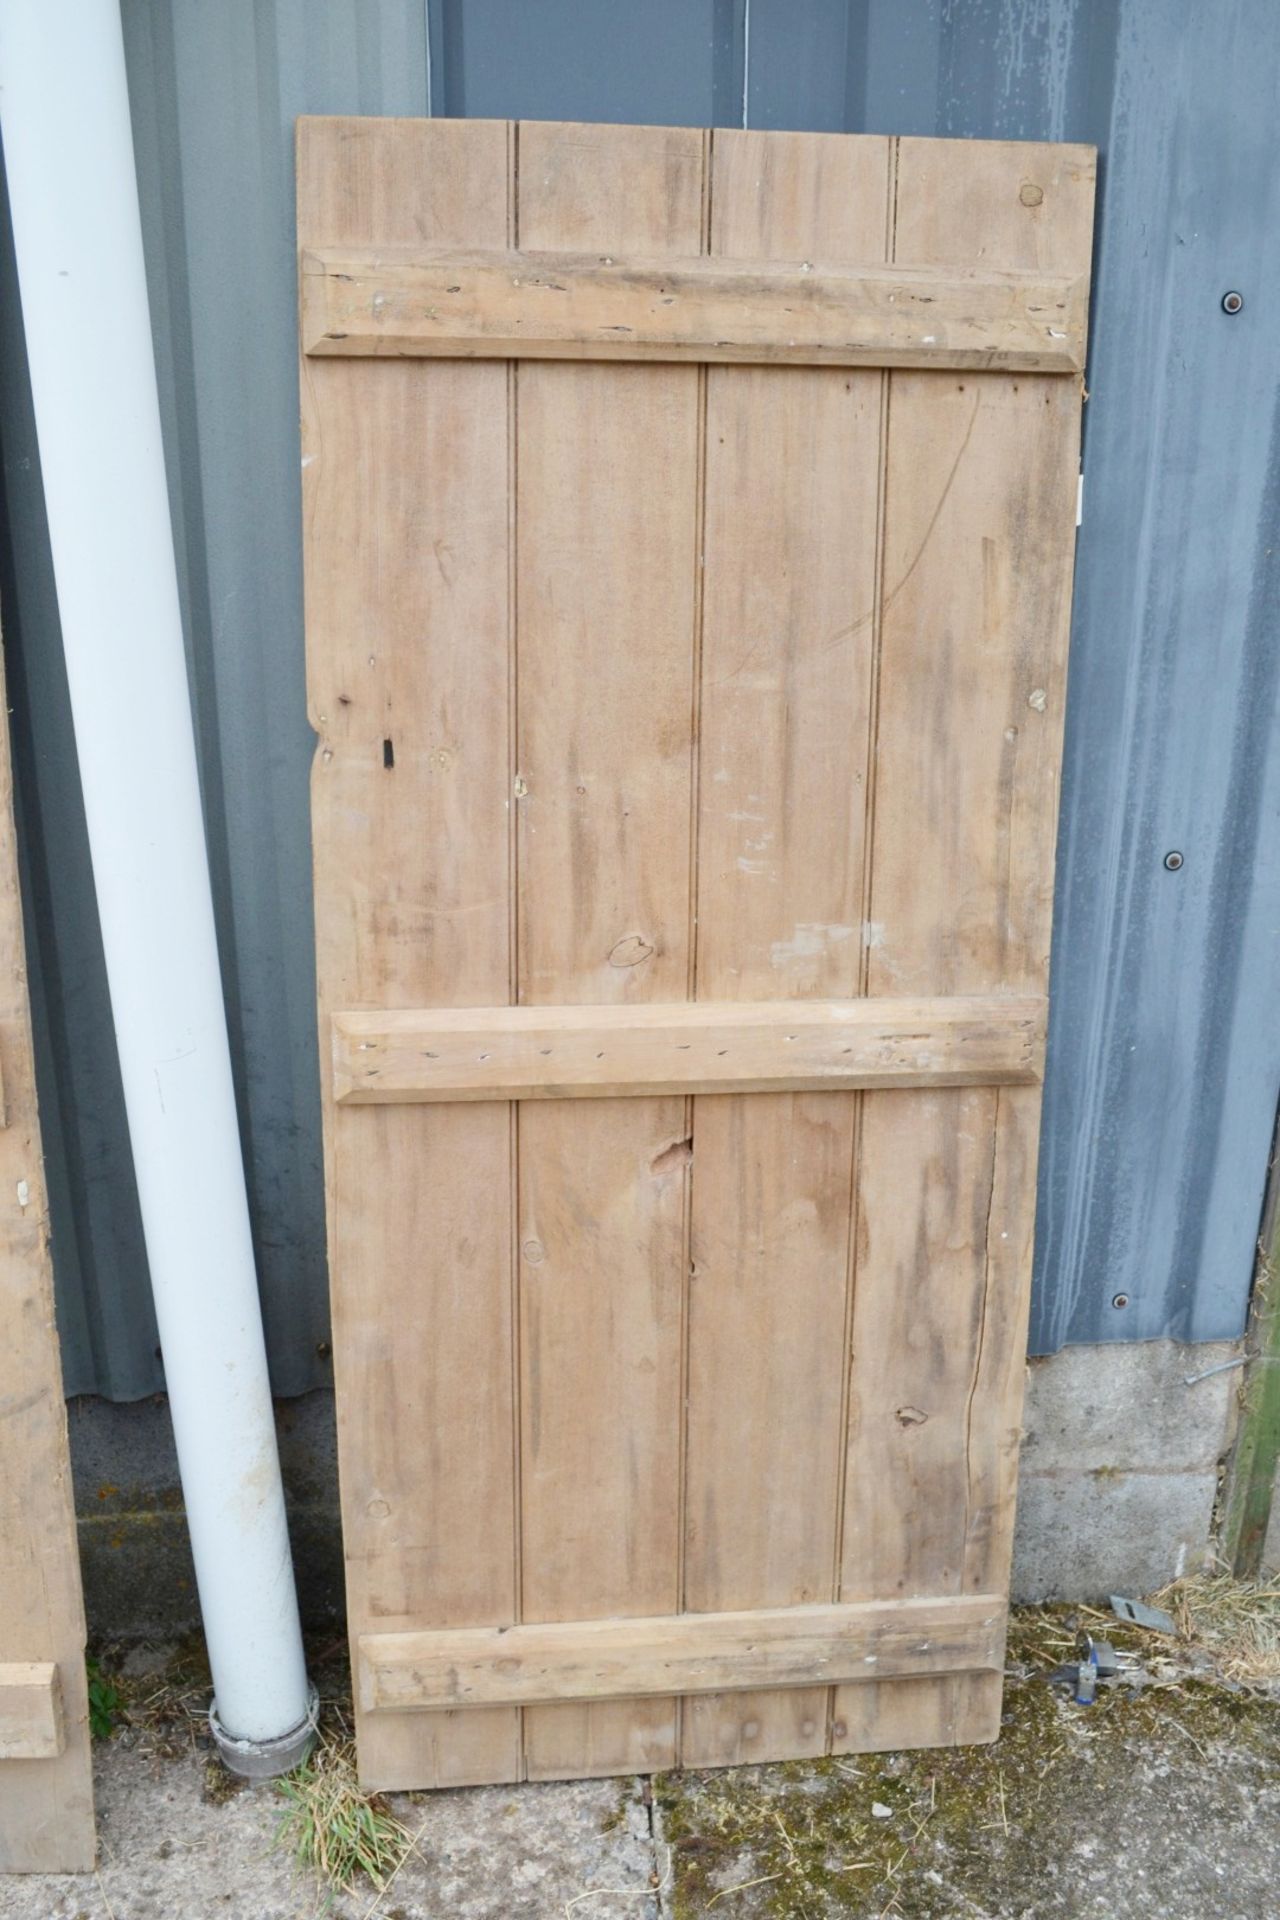 Set Of 4 x Reclaimed Unpainted Wooden Doors - Taken From A Grade II Listed Property - Image 4 of 8